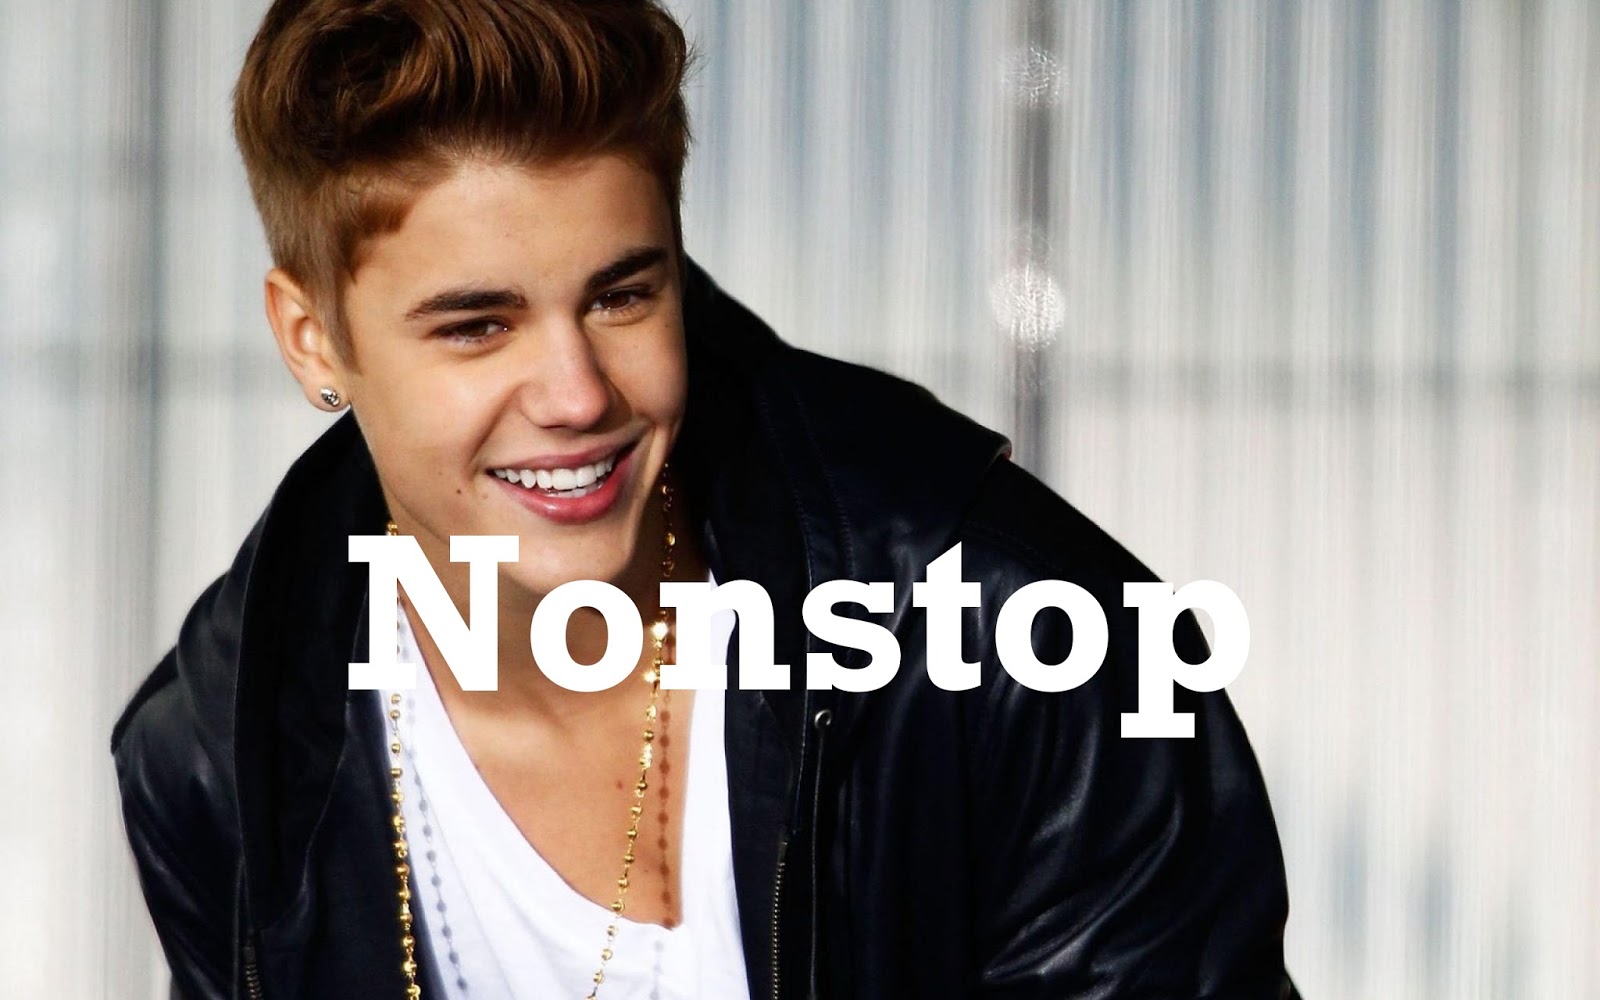 Free Direct Download Nonstop Mp3 Music: Justin Bieber Nonstop mp3 song